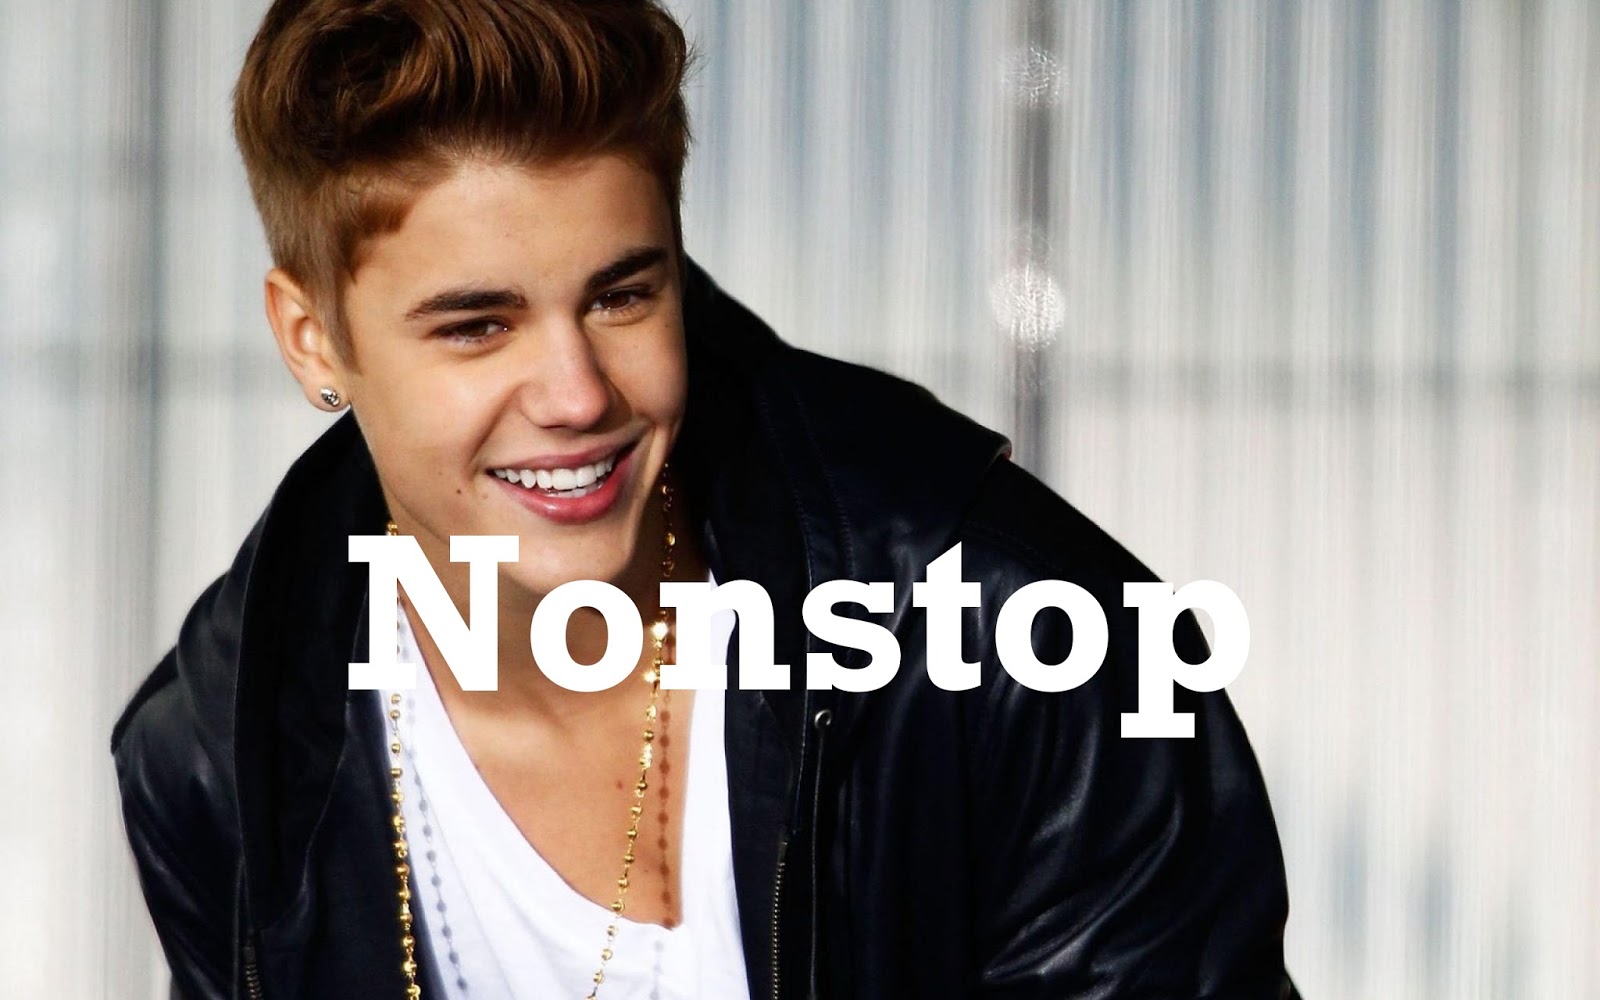 Free Direct Download Nonstop Mp3 Music: Justin Bieber Nonstop mp3 song